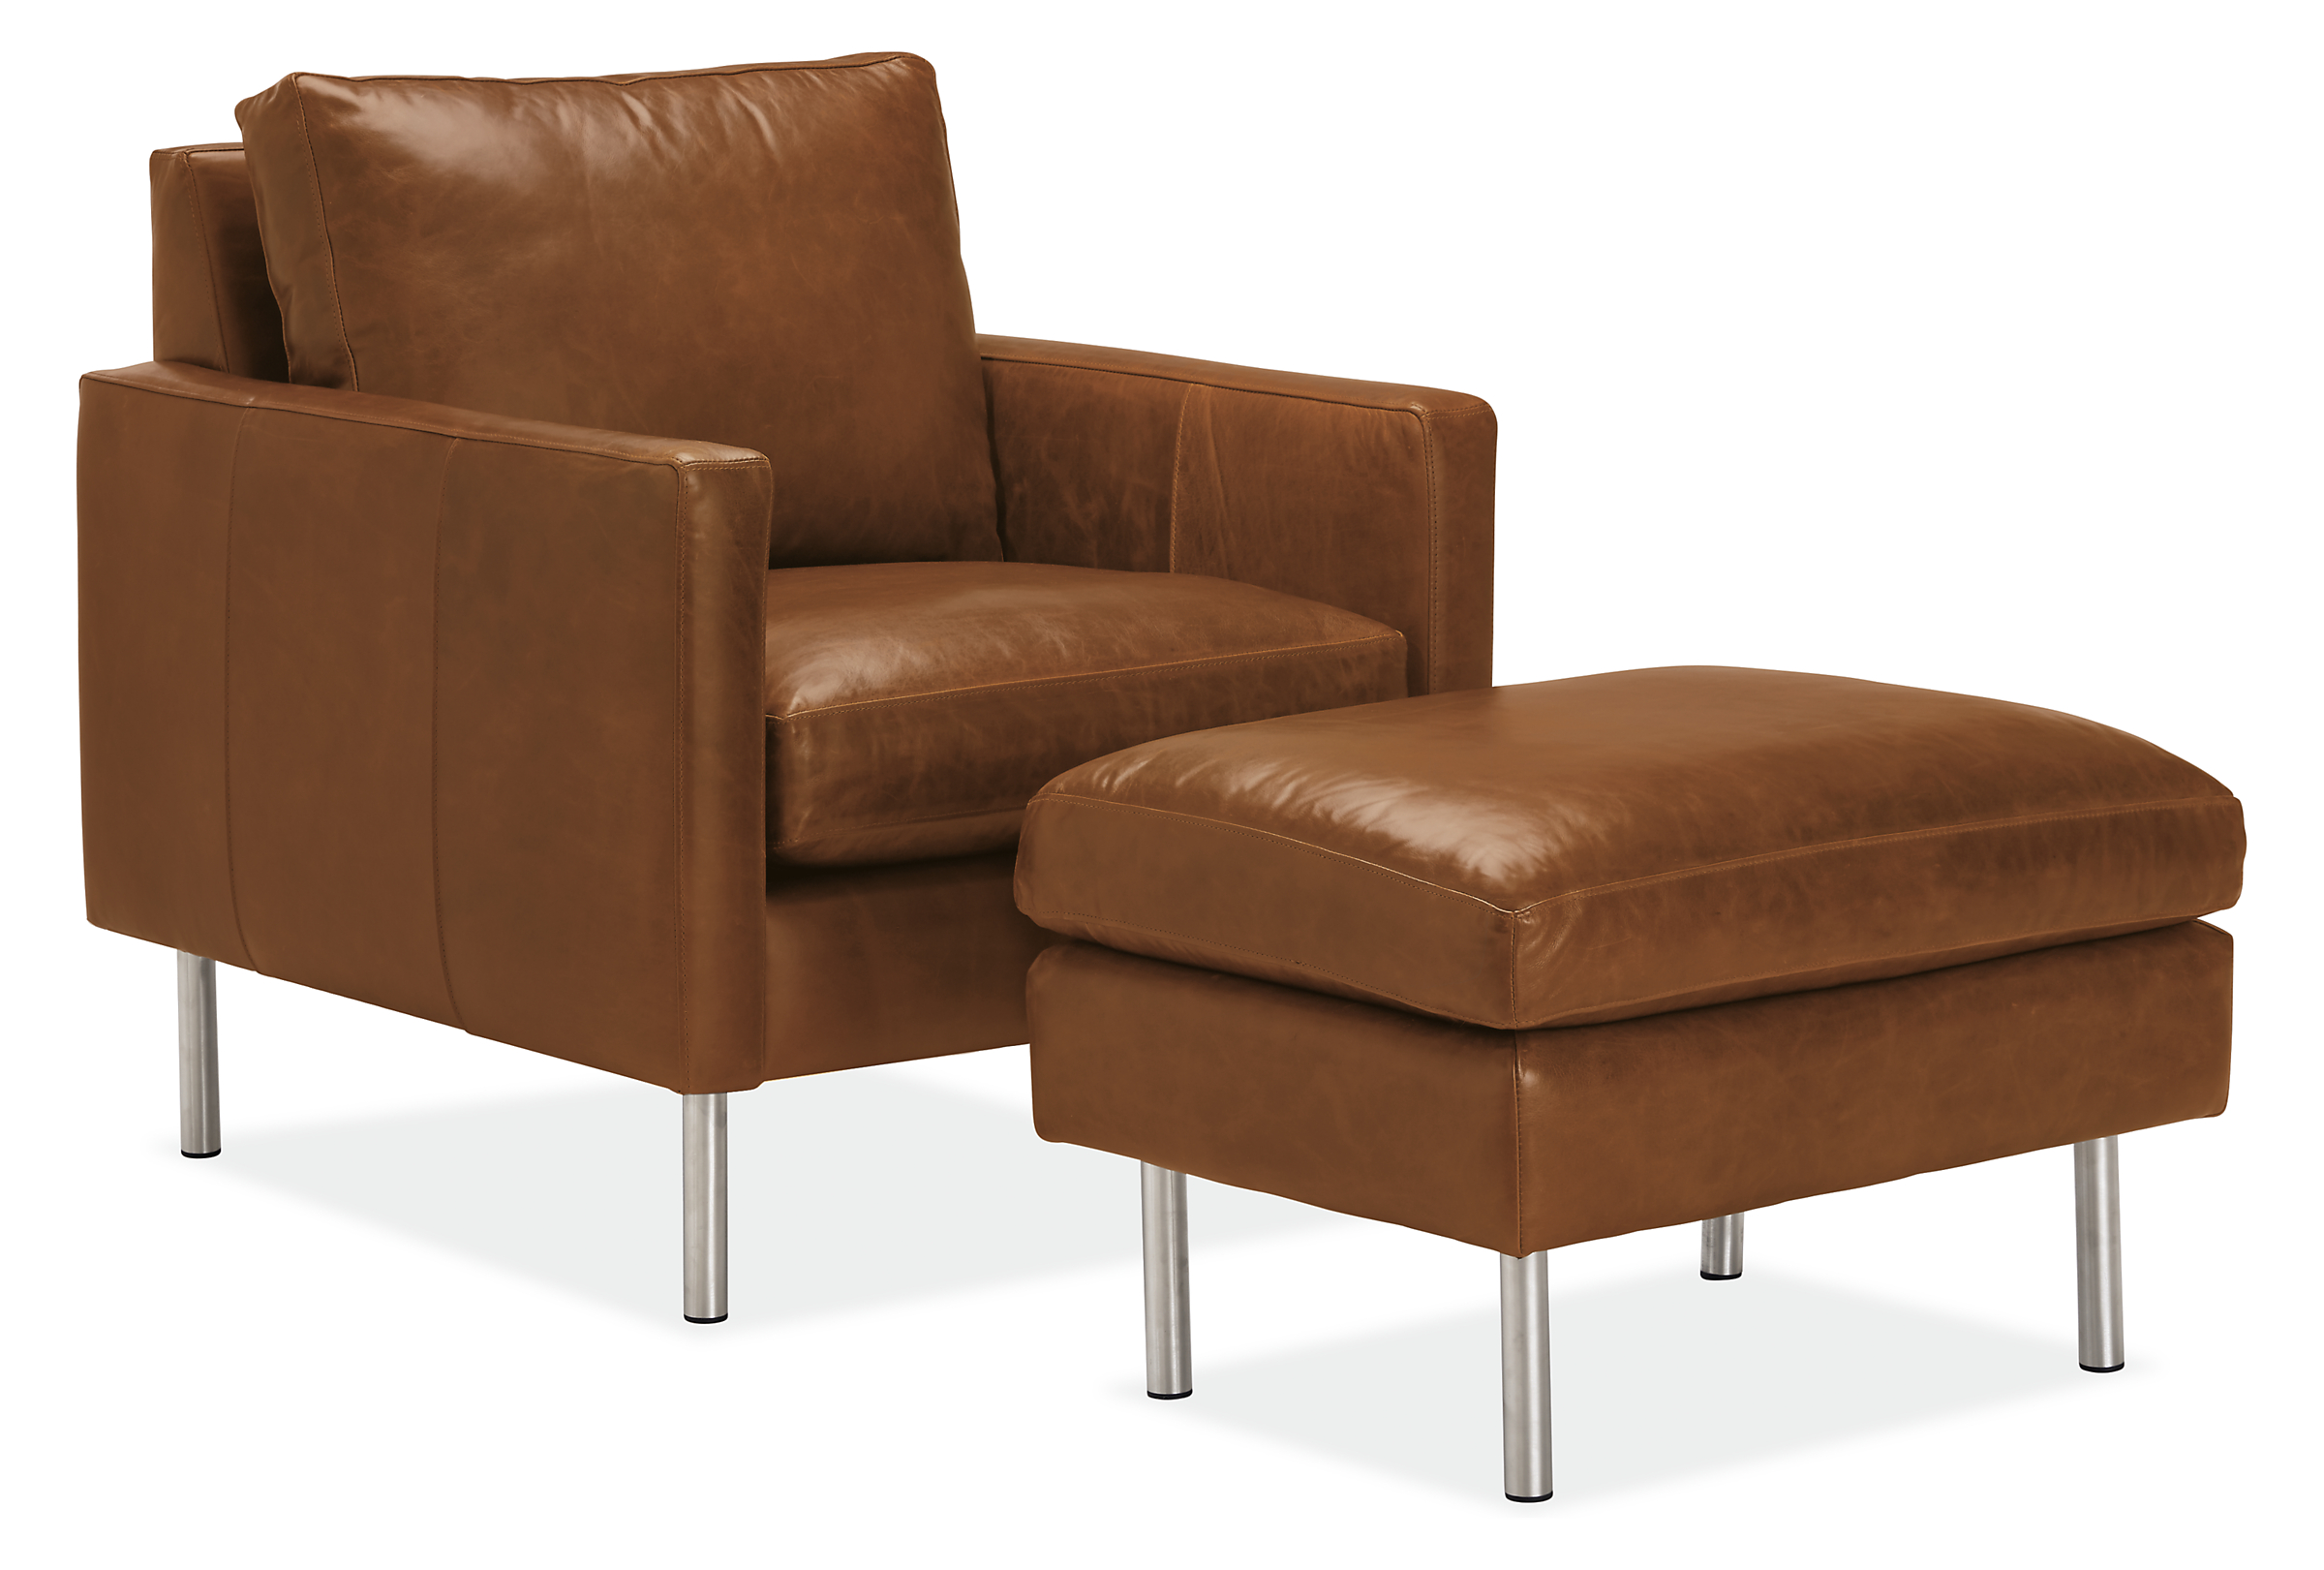 Jasper 30" Chair and Ottoman in Vento Leather with Metal Legs.